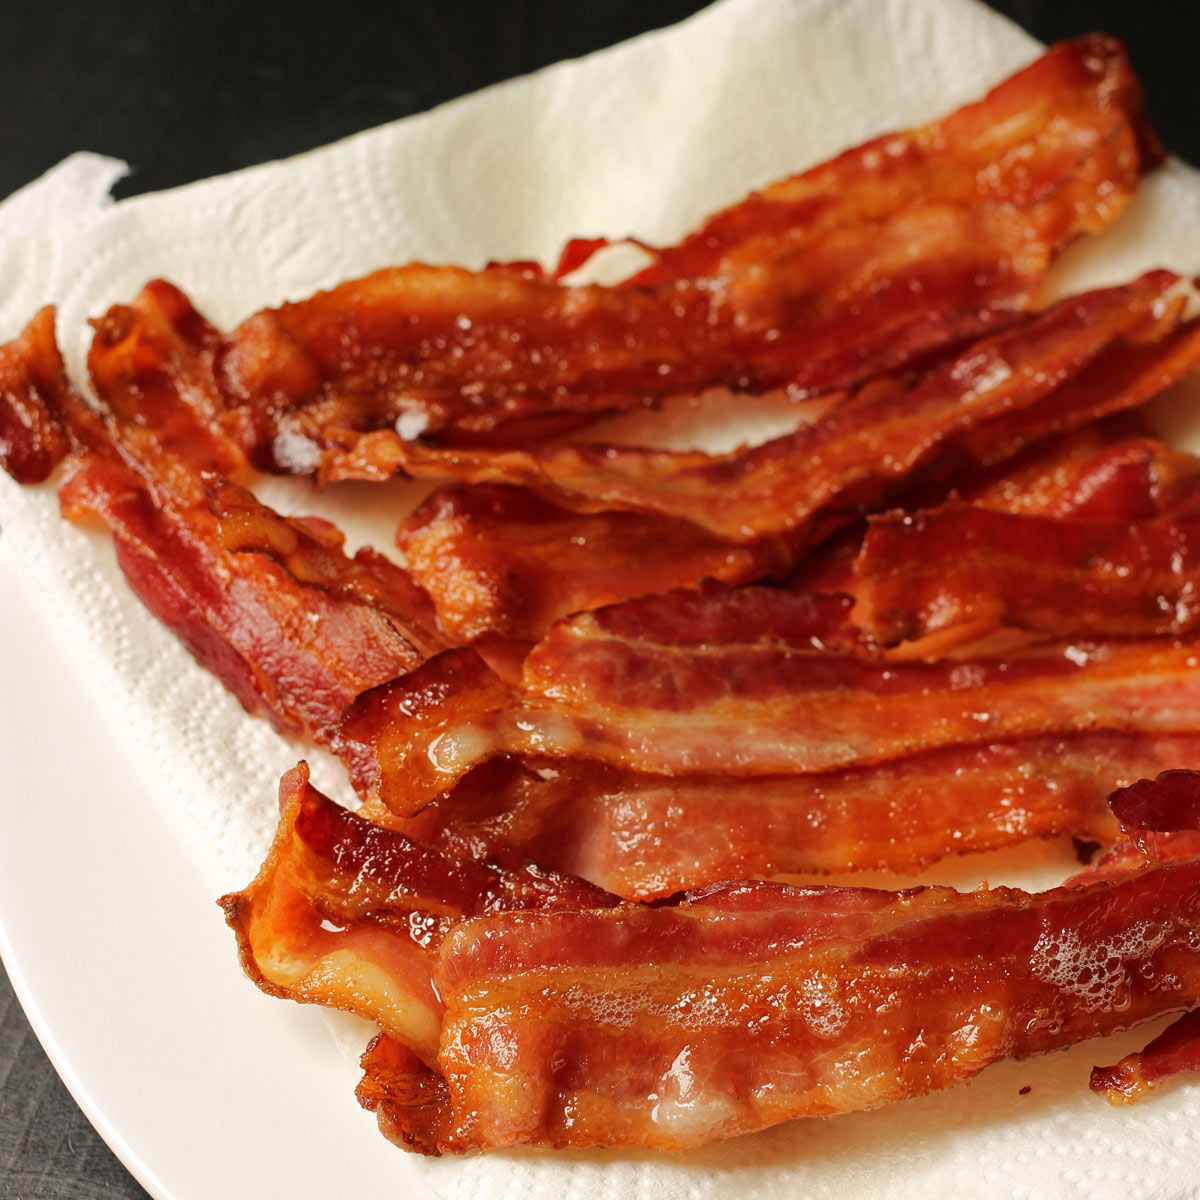 slices of baked bacon on paper toweling.